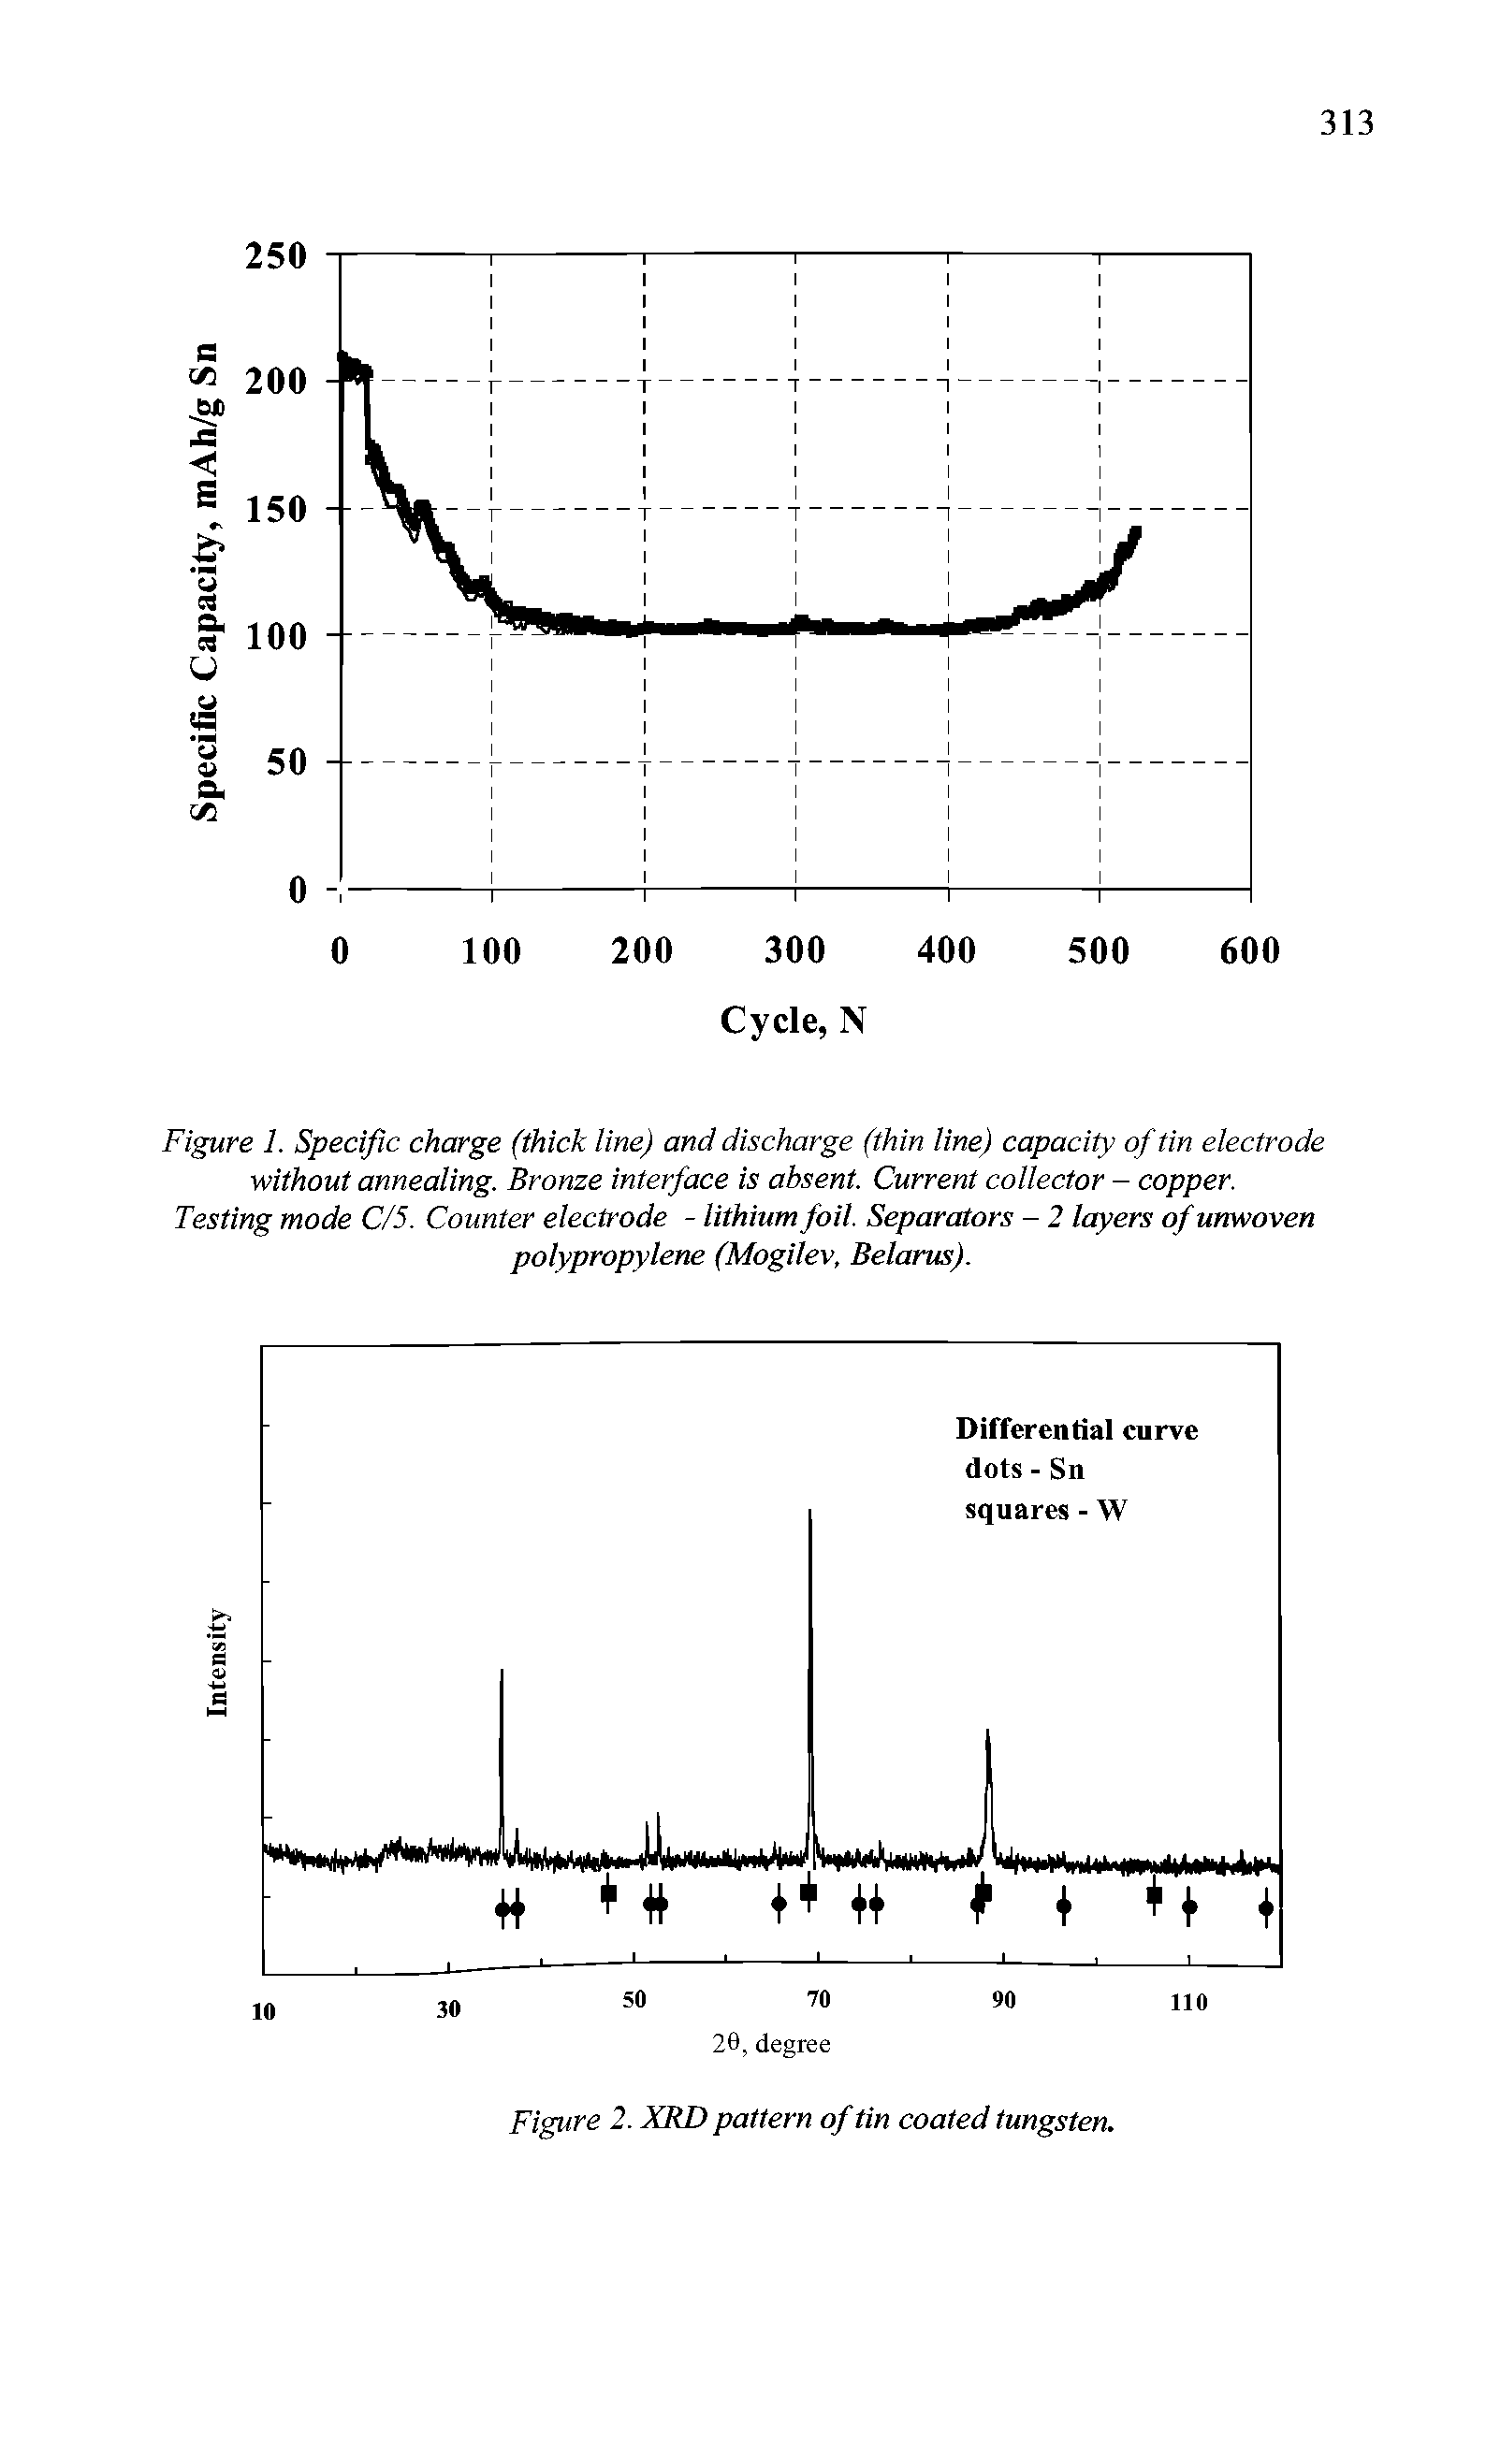 Figure 1. Specific charge (thick line) and discharge (thin line) capacity of tin electrode without annealing. Bronze interface is absent. Current collector - copper. Testing mode C/5. Counter electrode - lithium foil. Separators - 2 layers of unwoven polypropylene (Mogilev, Belarus).